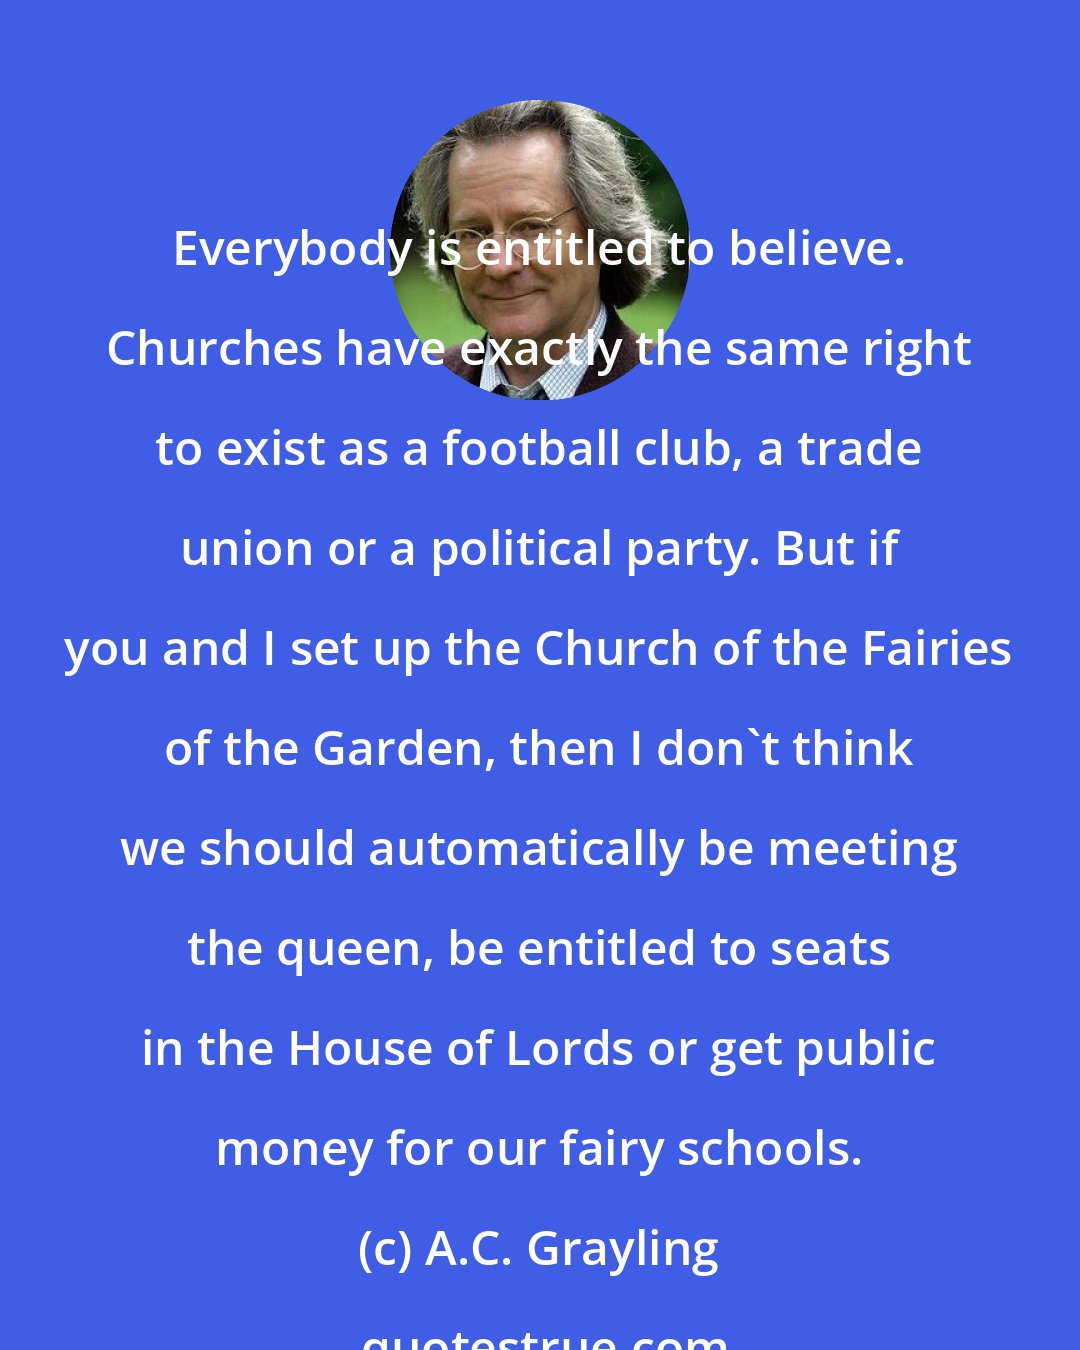 A.C. Grayling: Everybody is entitled to believe. Churches have exactly the same right to exist as a football club, a trade union or a political party. But if you and I set up the Church of the Fairies of the Garden, then I don't think we should automatically be meeting the queen, be entitled to seats in the House of Lords or get public money for our fairy schools.